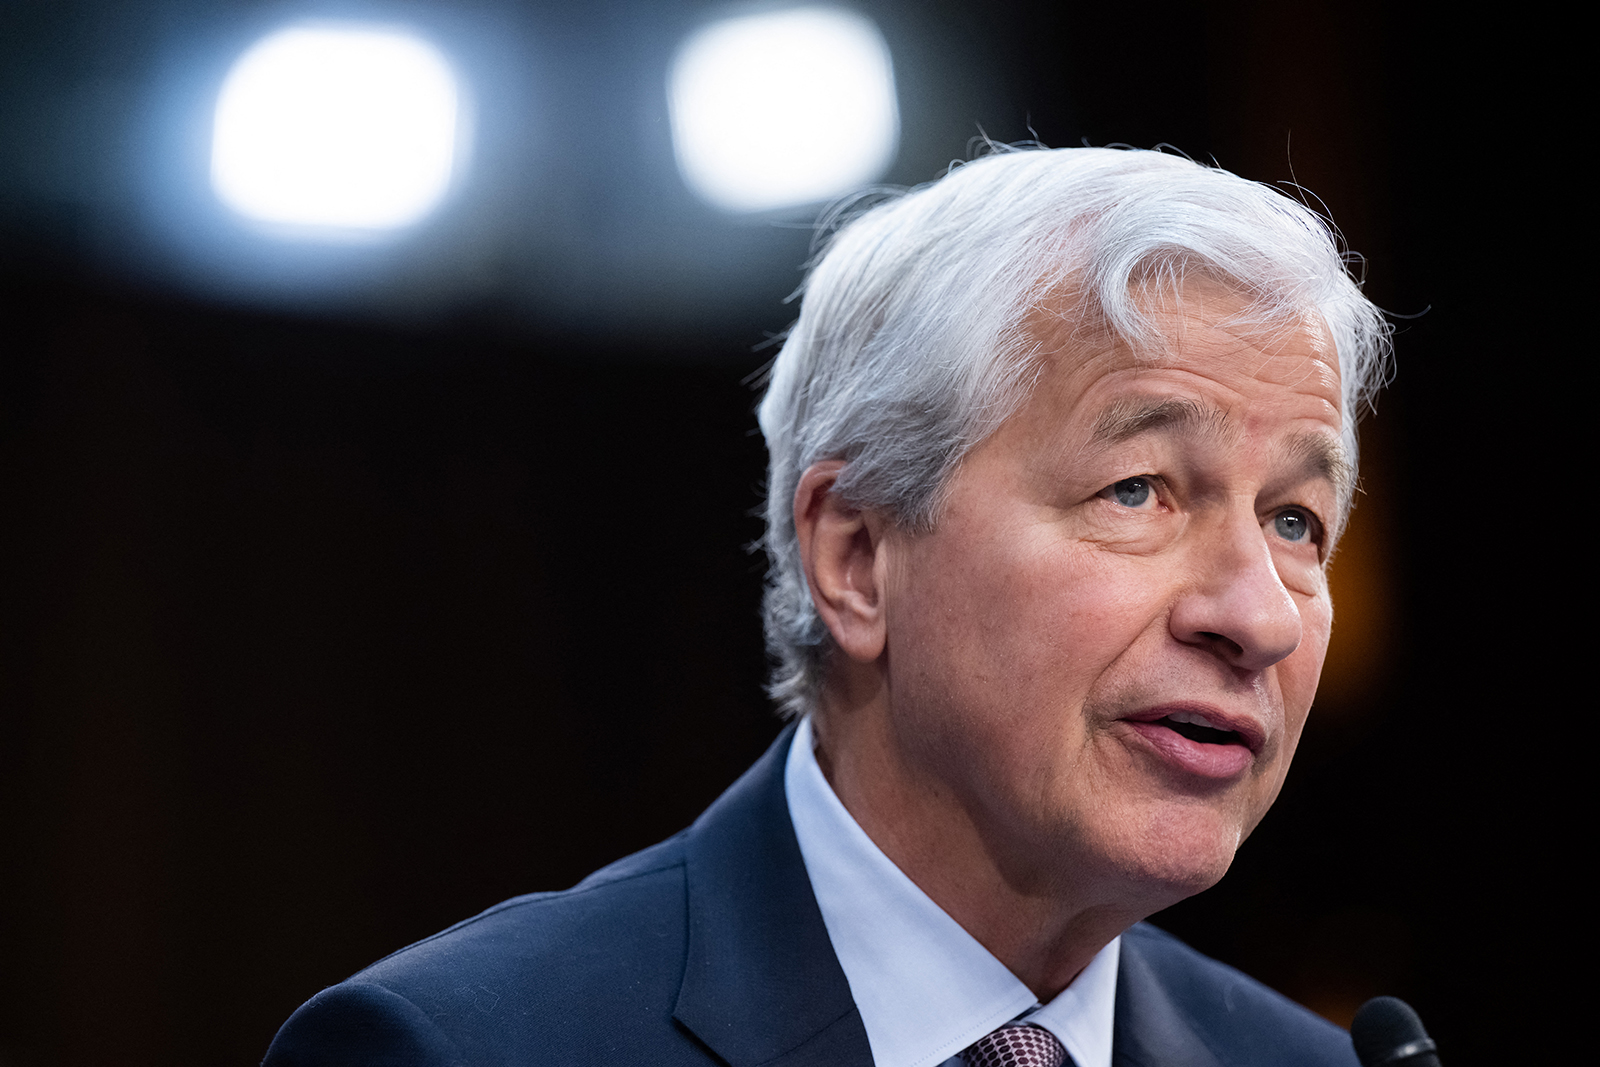 JPMorgan Chase Chairman and CEO Jamie Dimon testifies during a Wall Street oversight hearing by the Senate Banking, Housing, and Urban Affairs committee on Capitol Hill in Washington, DC, on December 6.